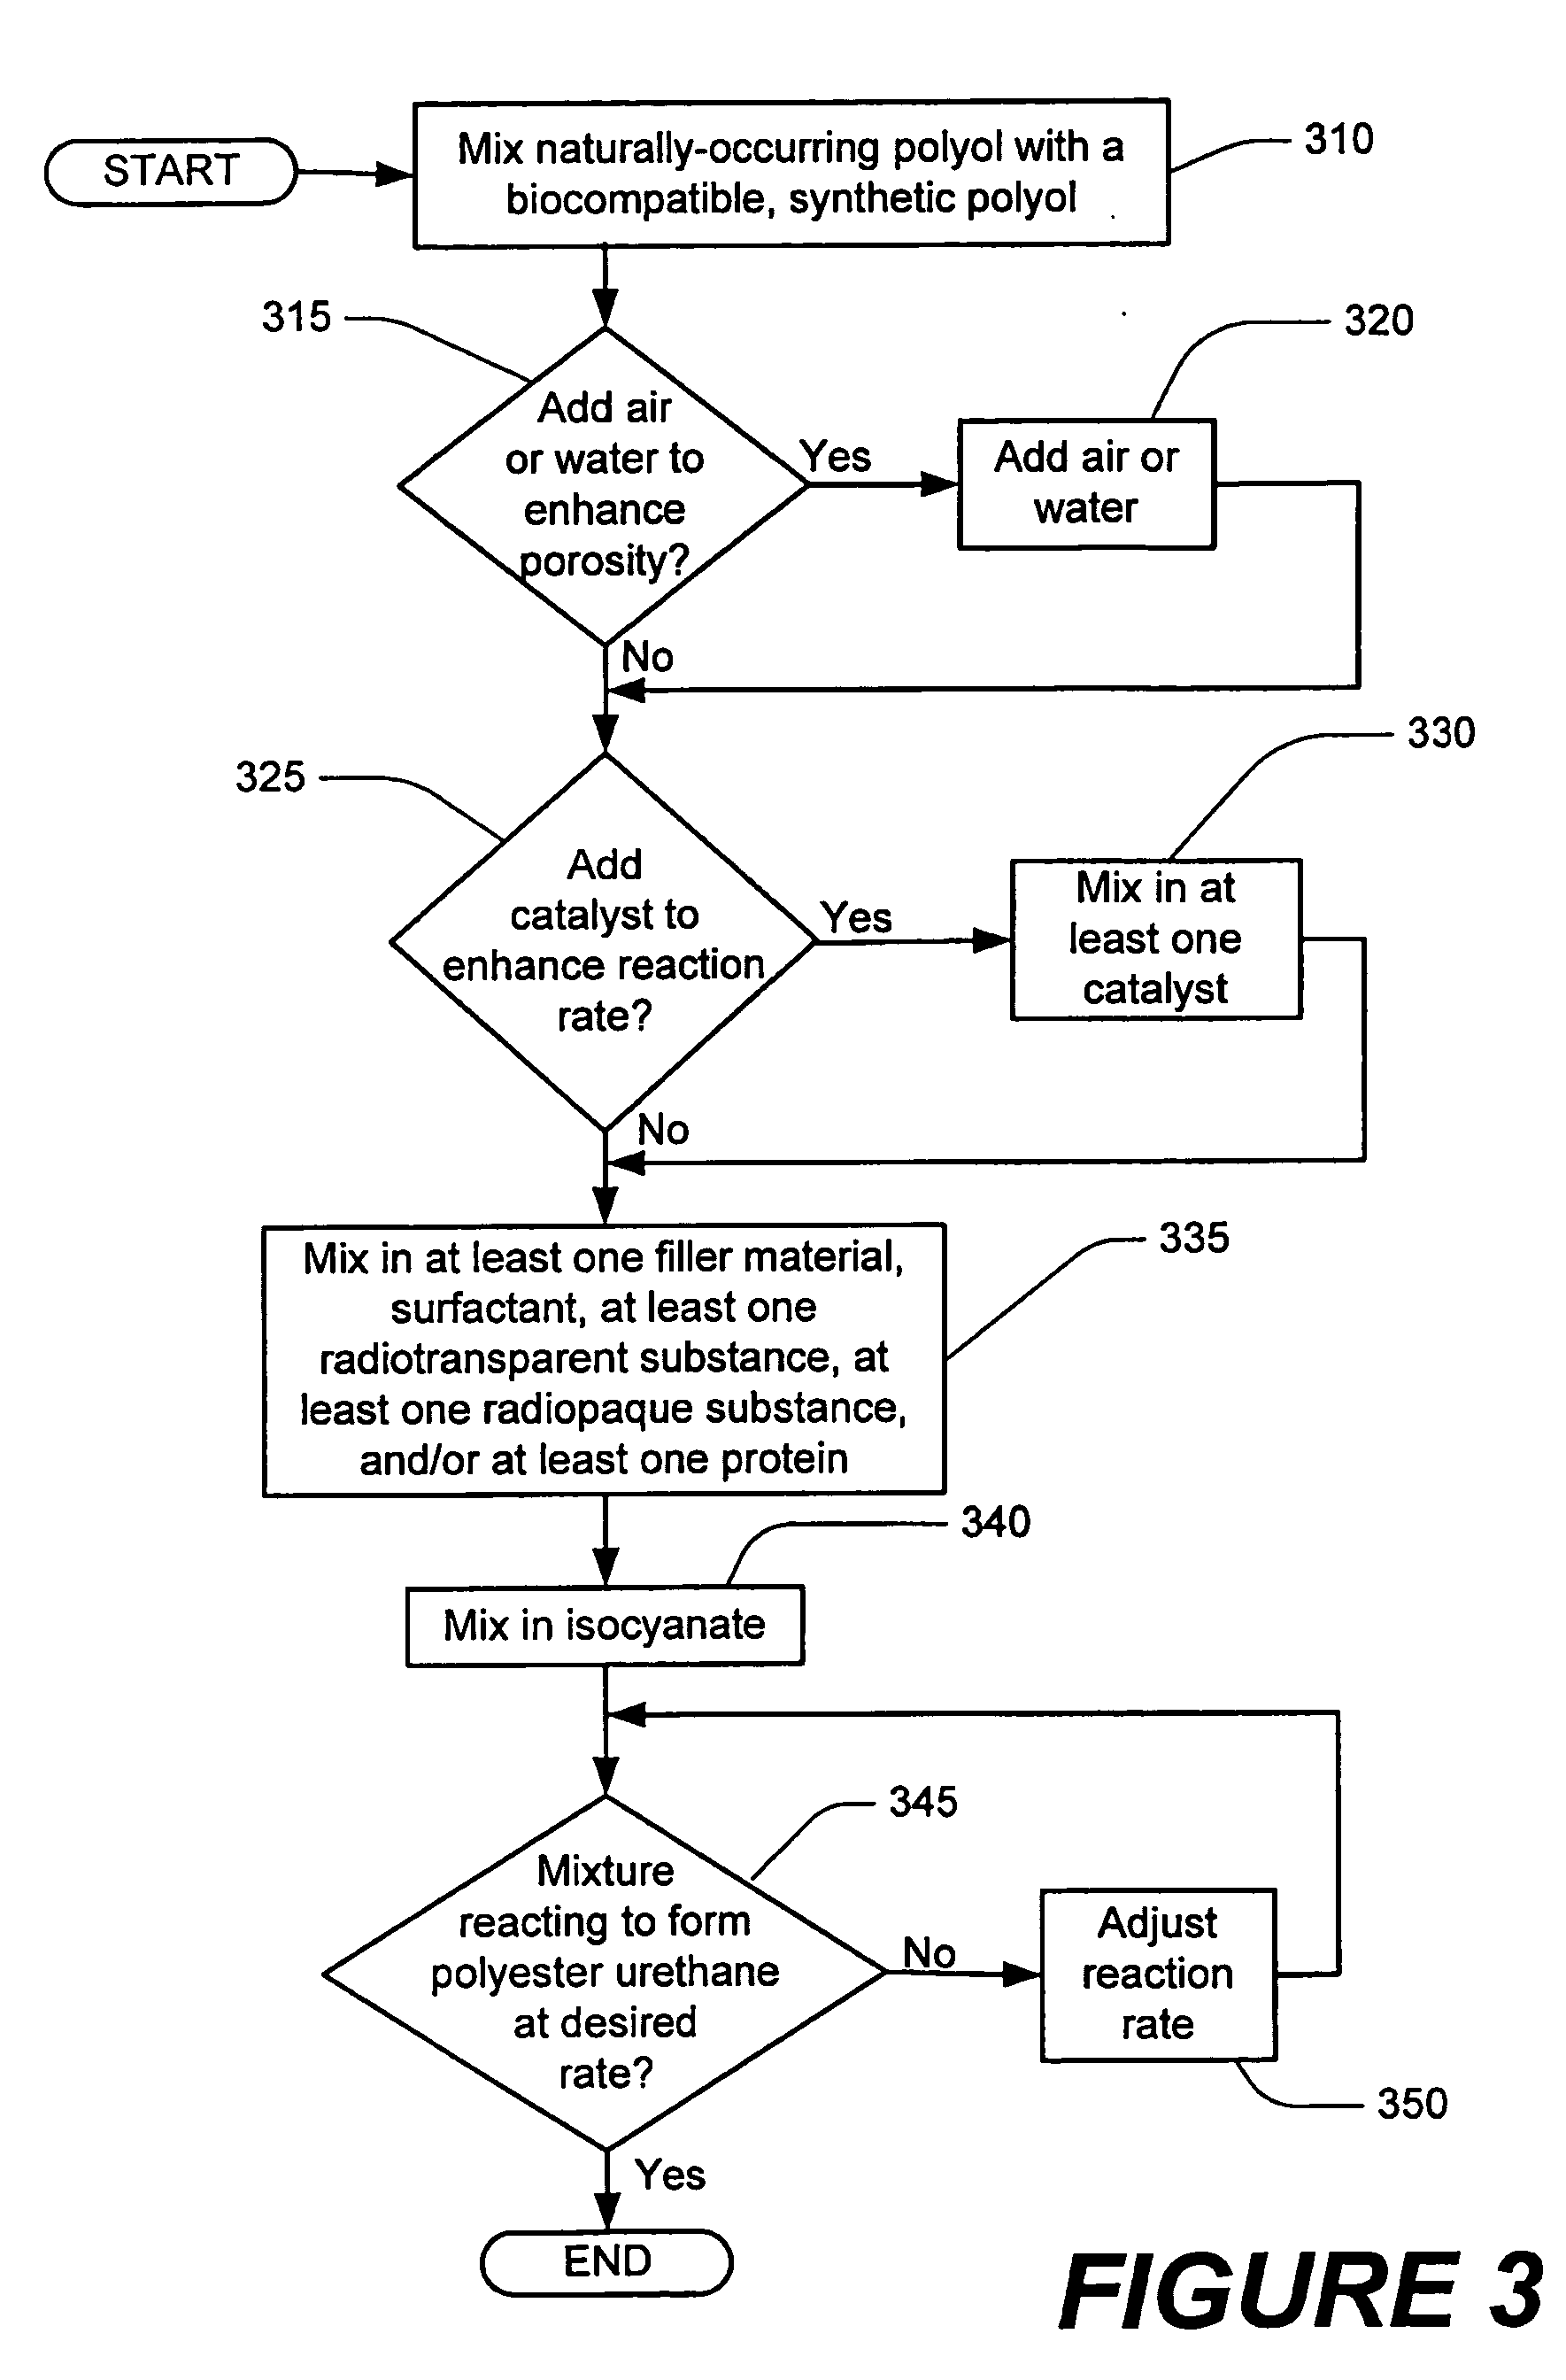 Methods of performing medical procedures which promote bone growth, compositions which promote bone growth, and methods of making such compositions